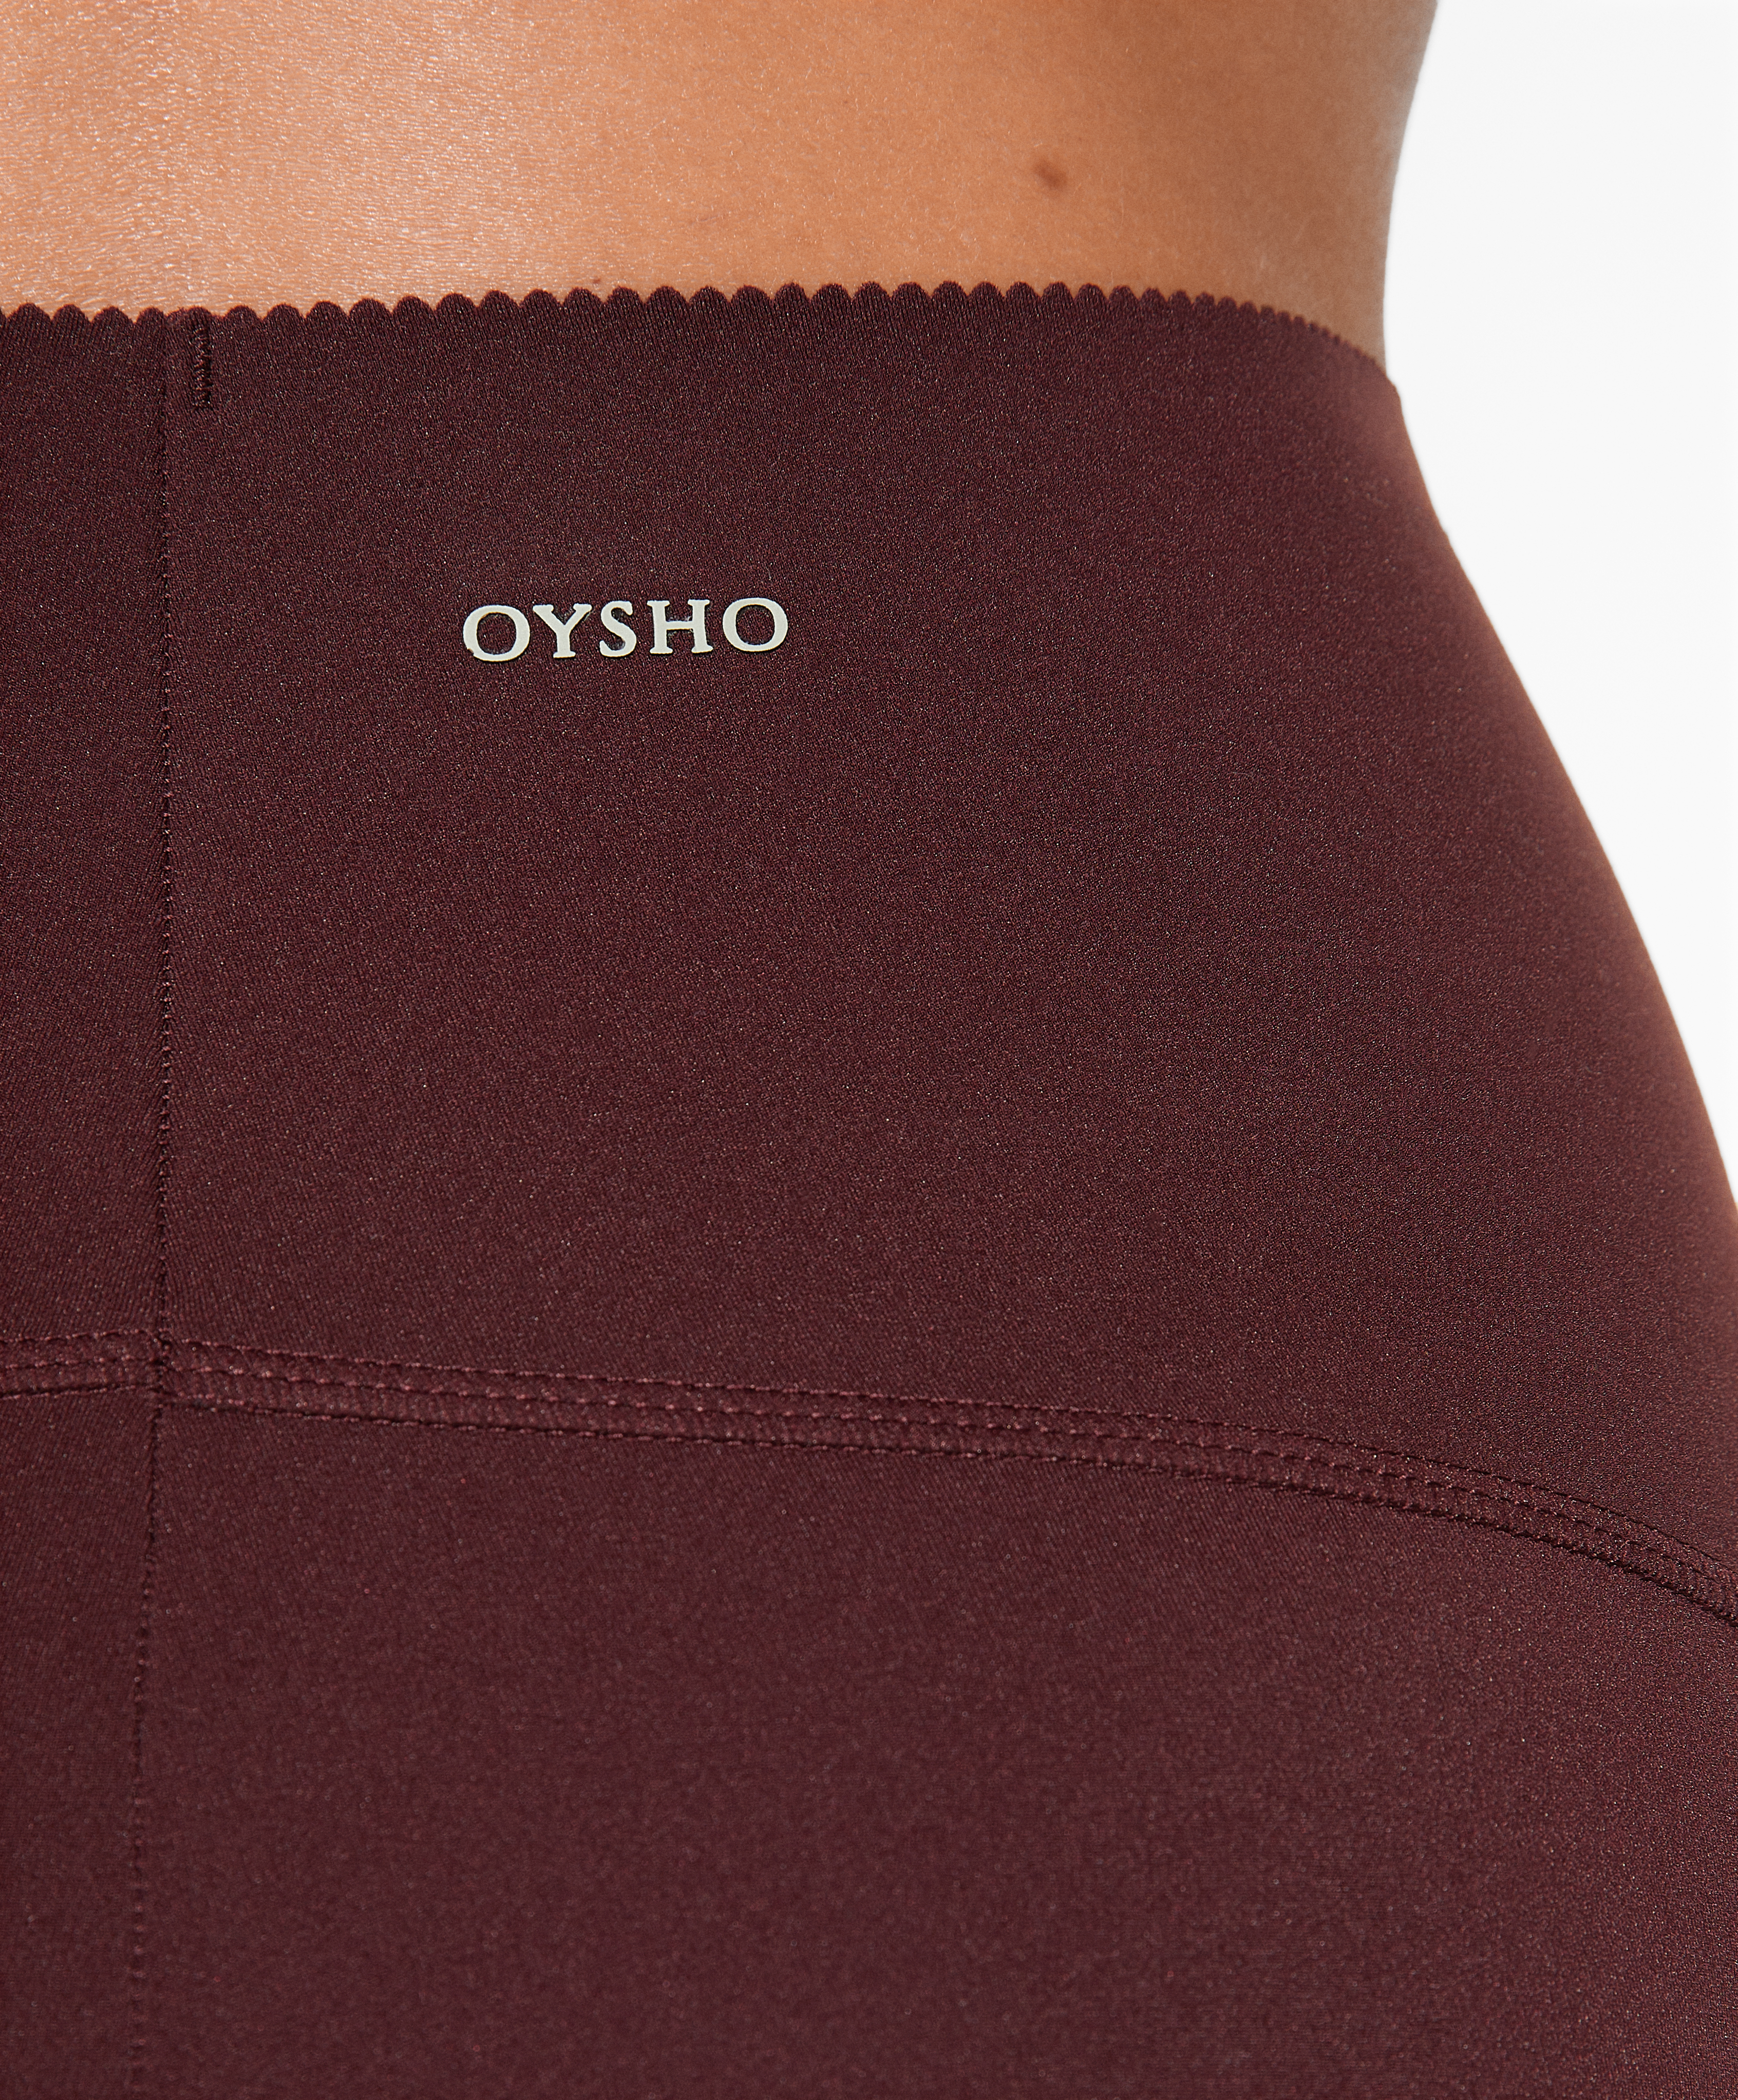 Oysho Leggings Lowest Price - Black Seamless Warmth Technical Ankle-length  Womens